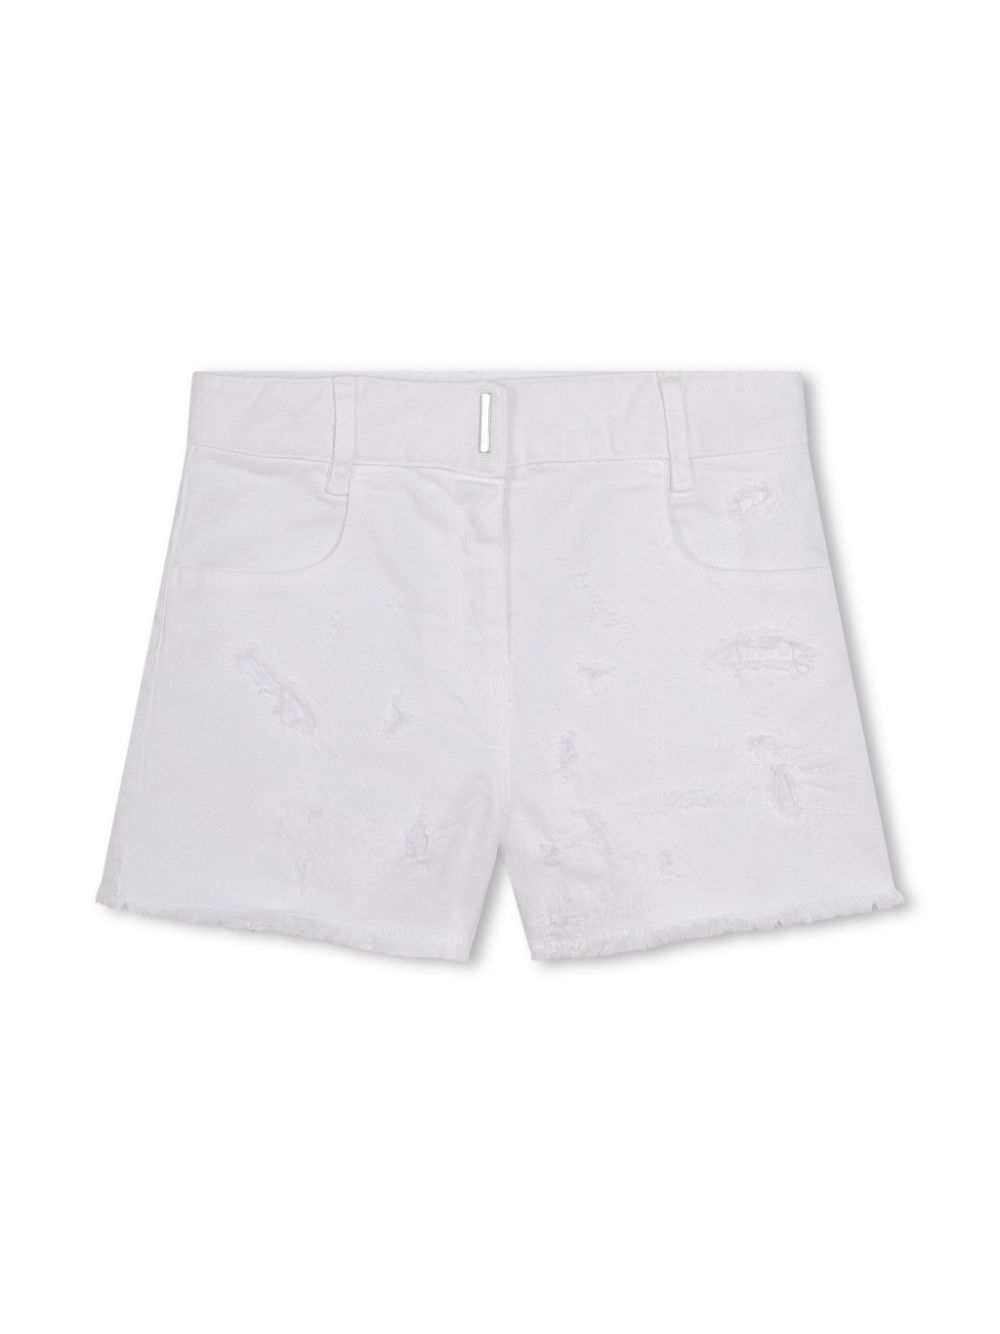 Givenchy Kids shorts in jeans